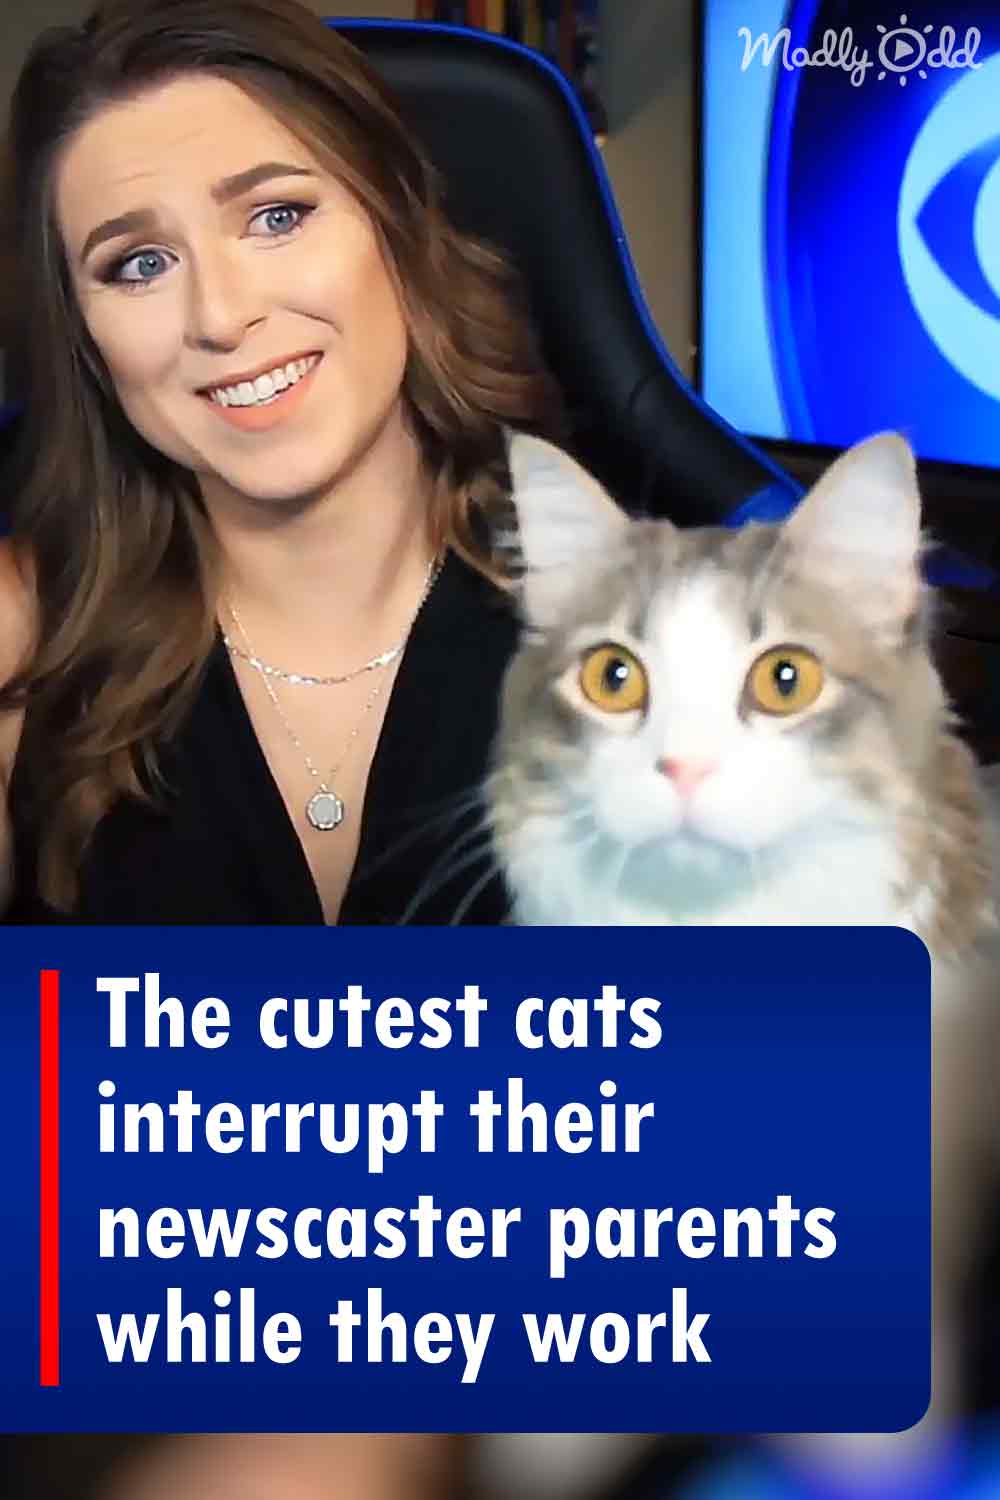 The cutest cats interrupt their newscaster parents while they work